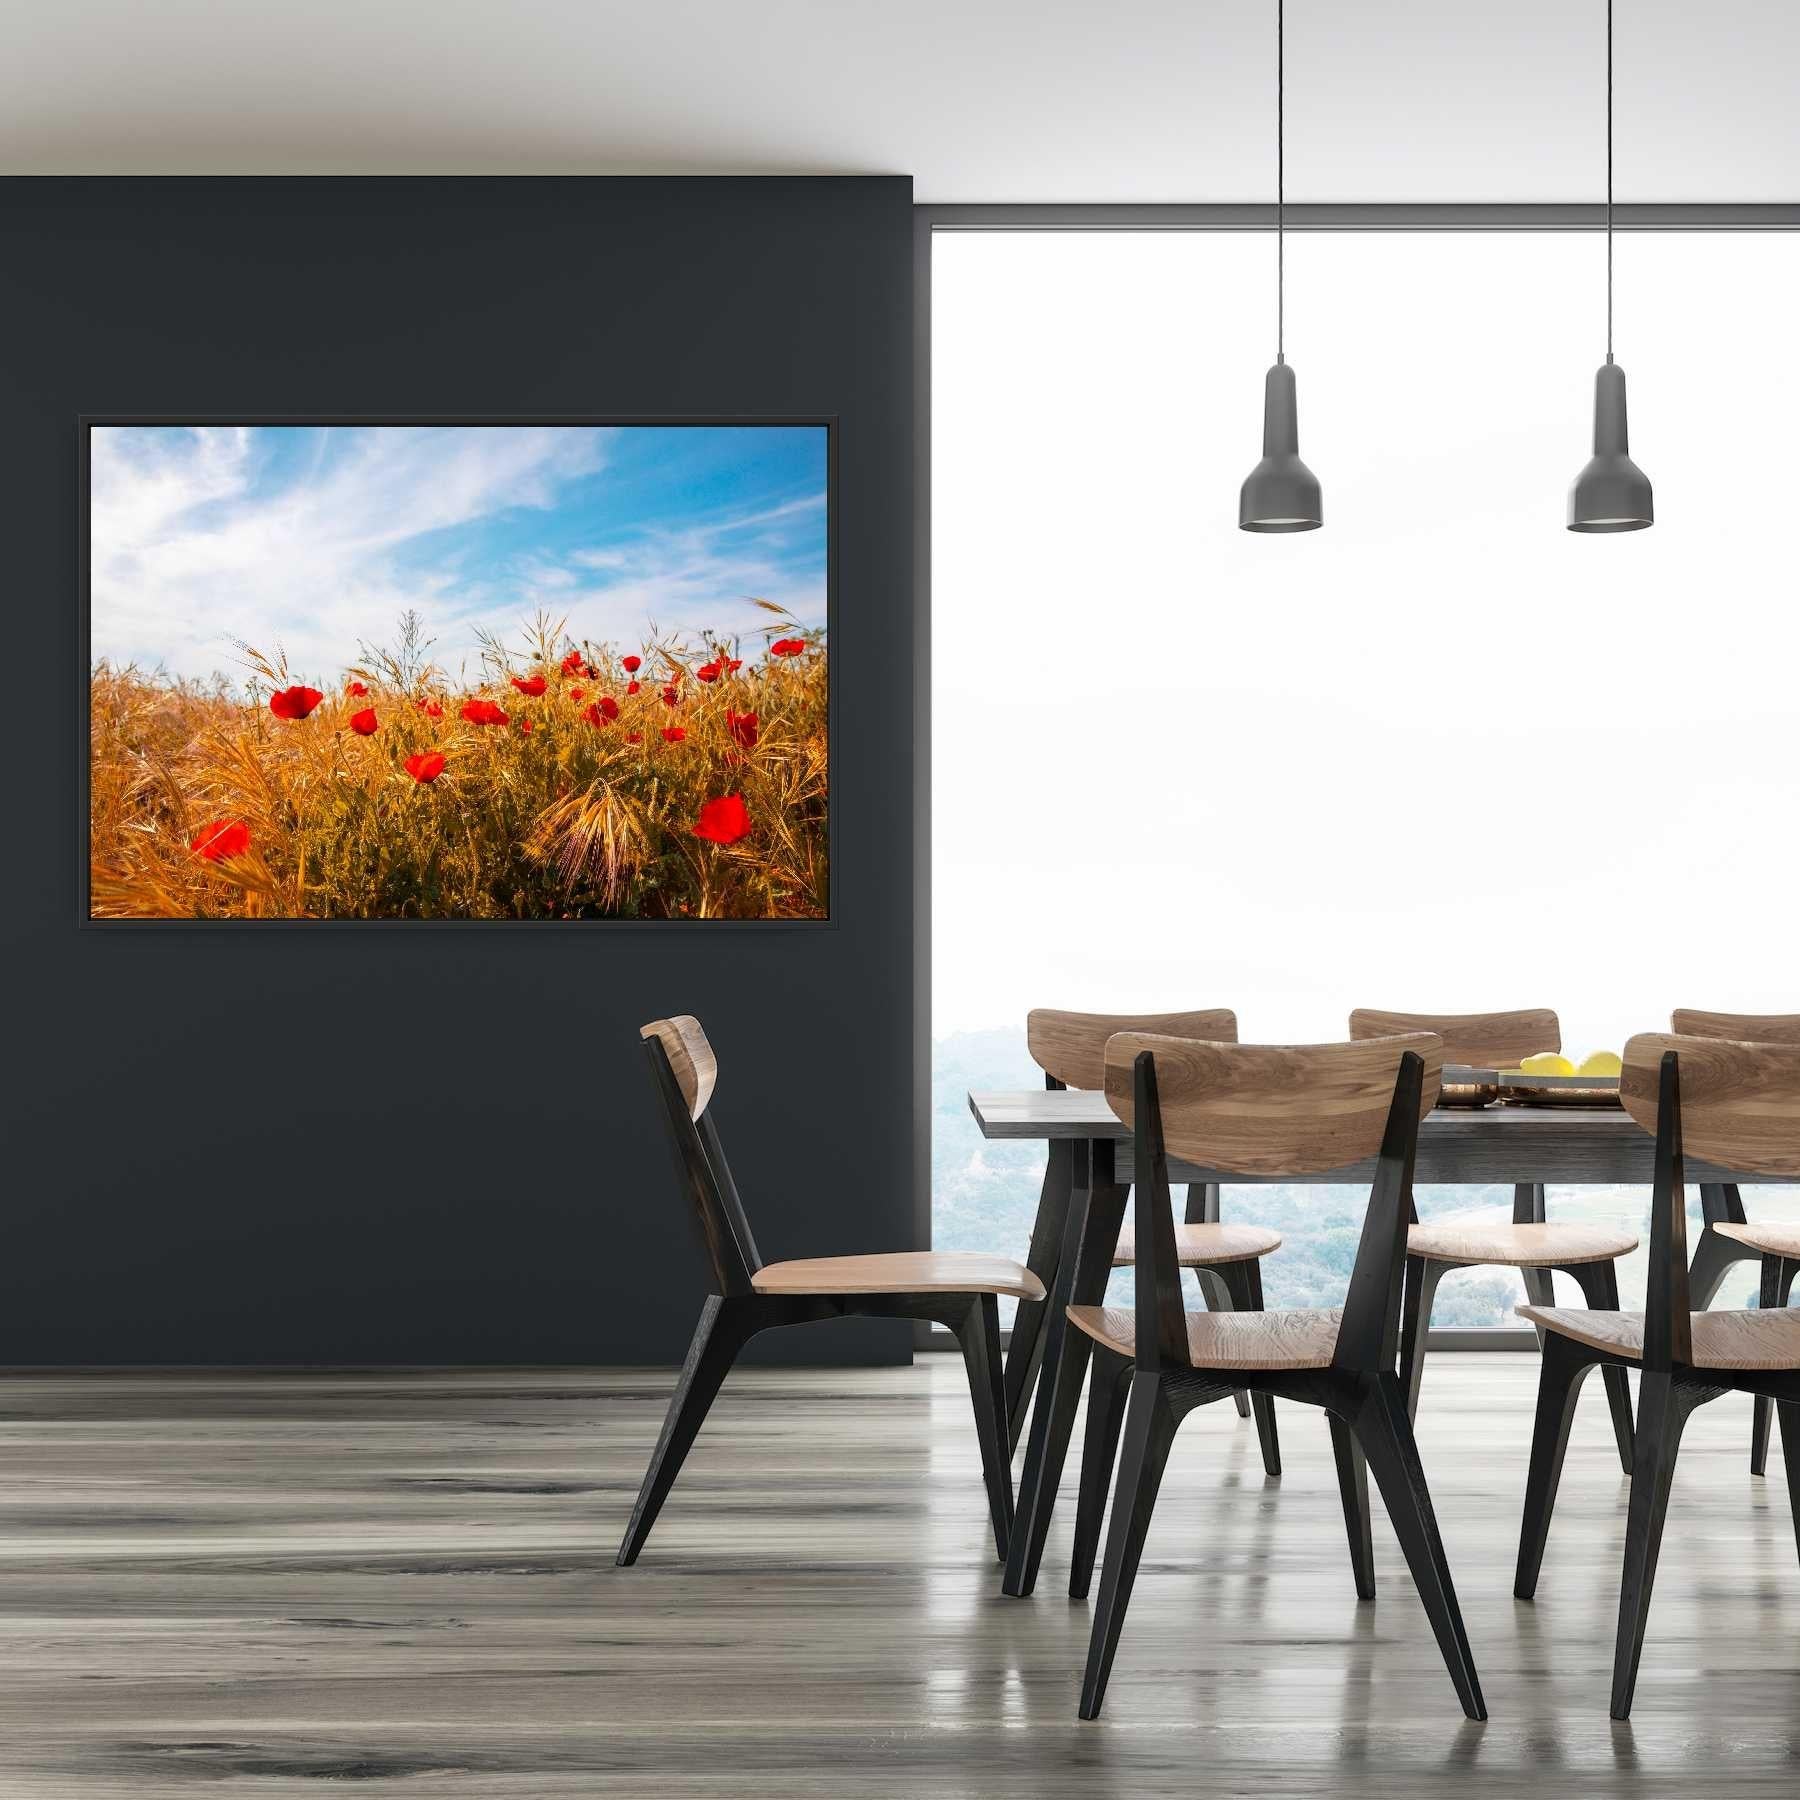 Poppy field in the province of Madrid, Spain.    The photograph is sold unframed, only the art print. The print is a GiclÃ©e on Canson Etching Rag 310gsm paper, a museum quality fine art paper which delivers the most accurate and vibrant colors in